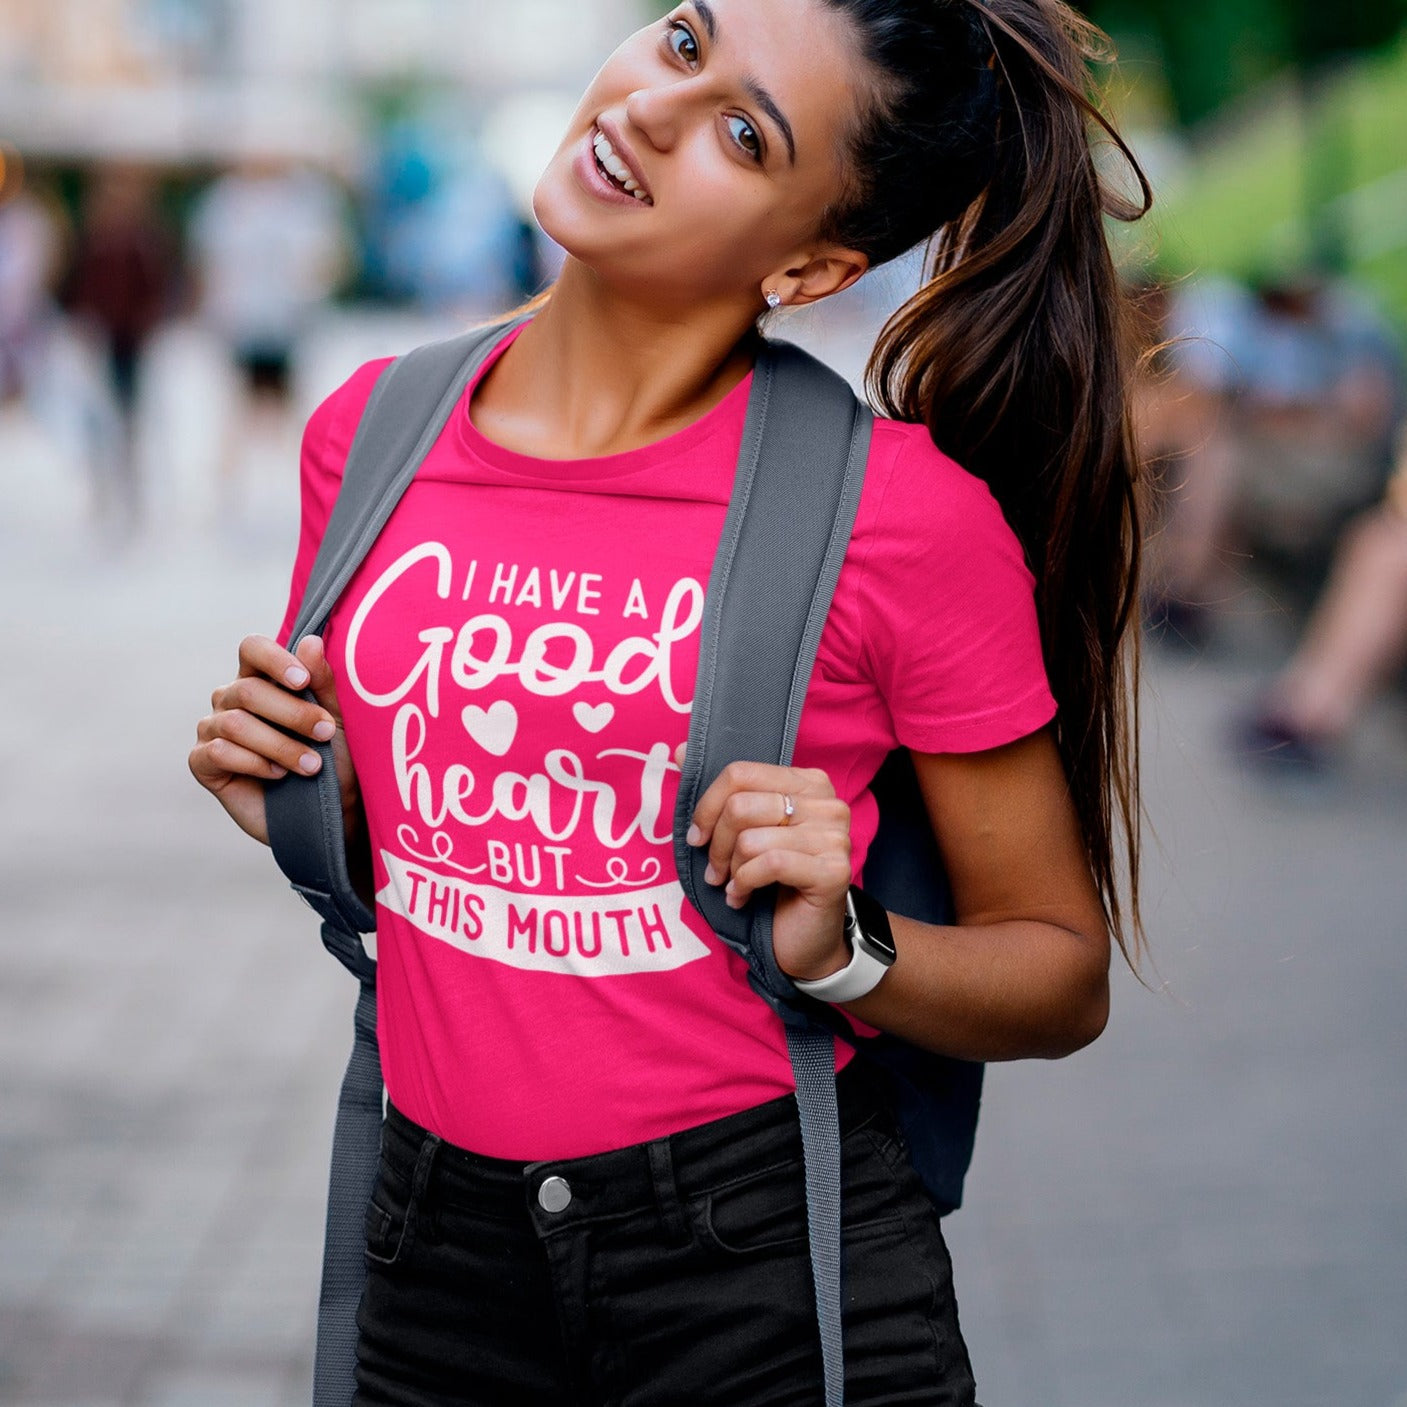 i-have-a-good-heart-but-this-mouth-berry-t-shirt-women-sarcastic-funny-mockup-of-a-joyful-student-on-the-street